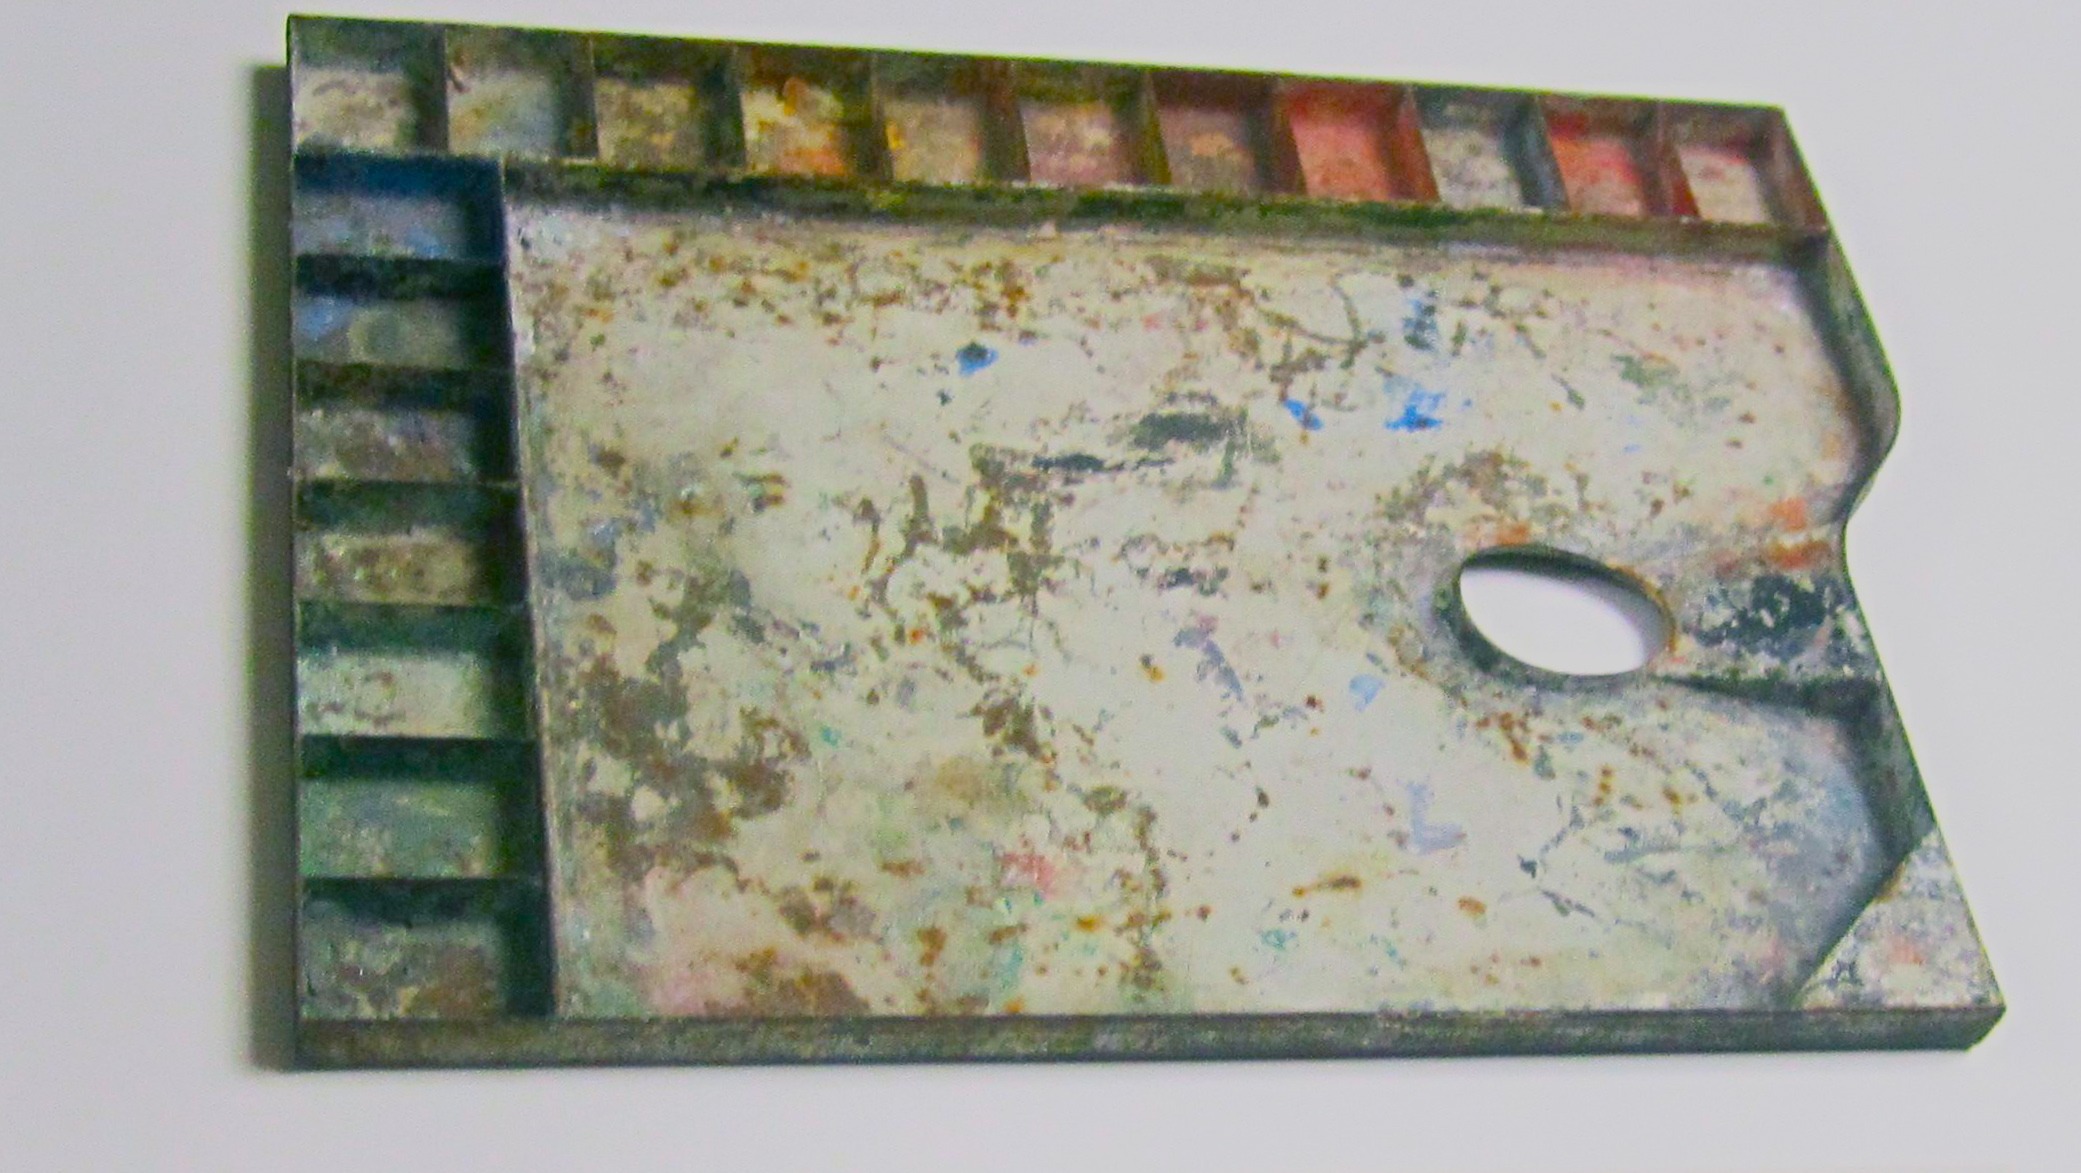 Franz Marc's palette, from the archives of the Franz Marc Museum, Kochel.